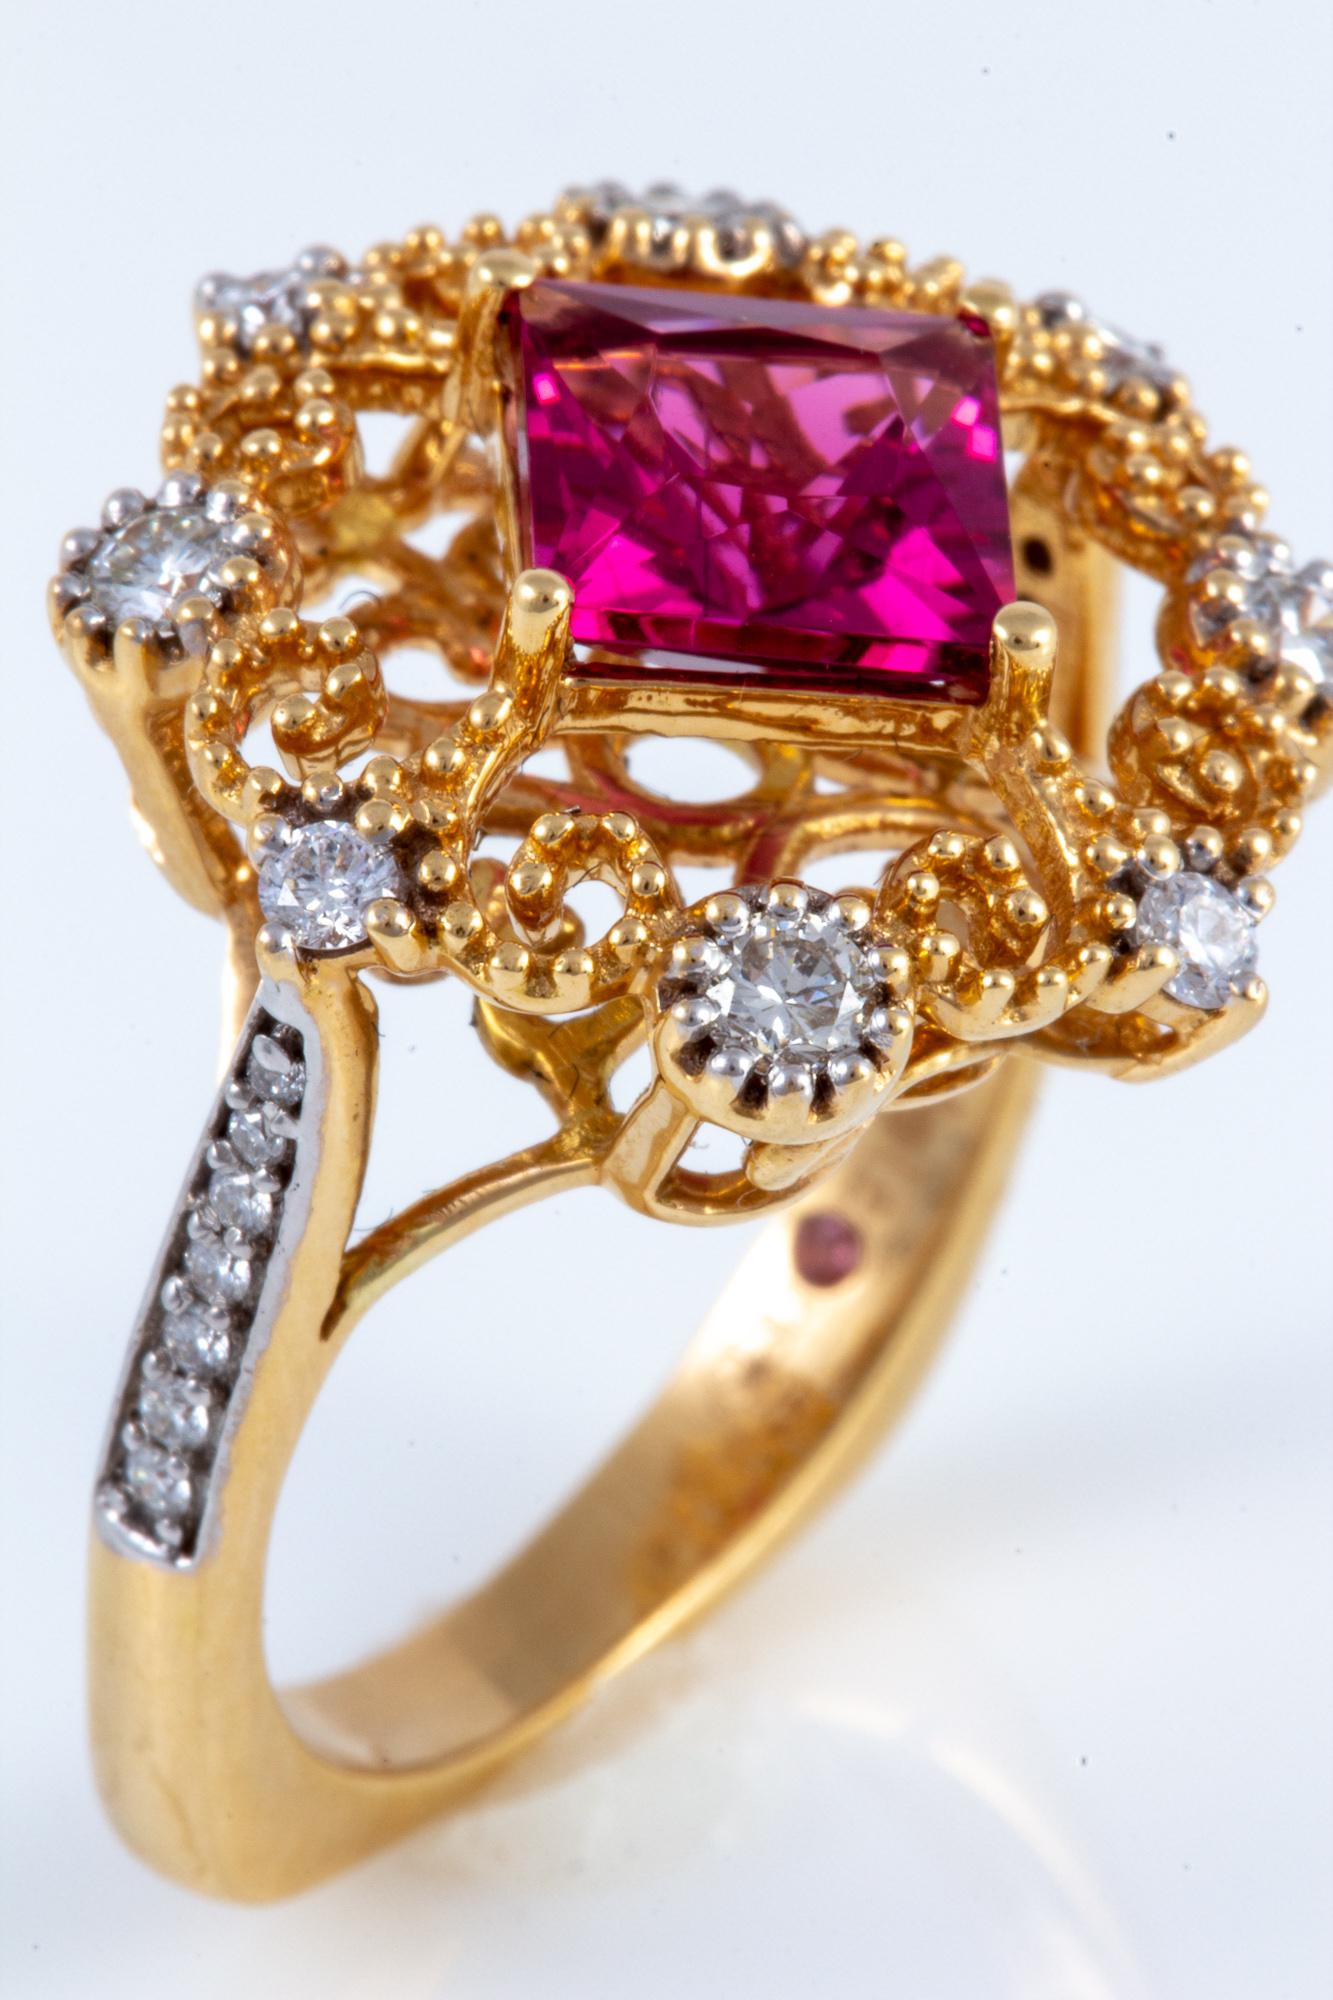 Rubellite Tourmaline and Diamond Ring set in 18 kt Gold 4